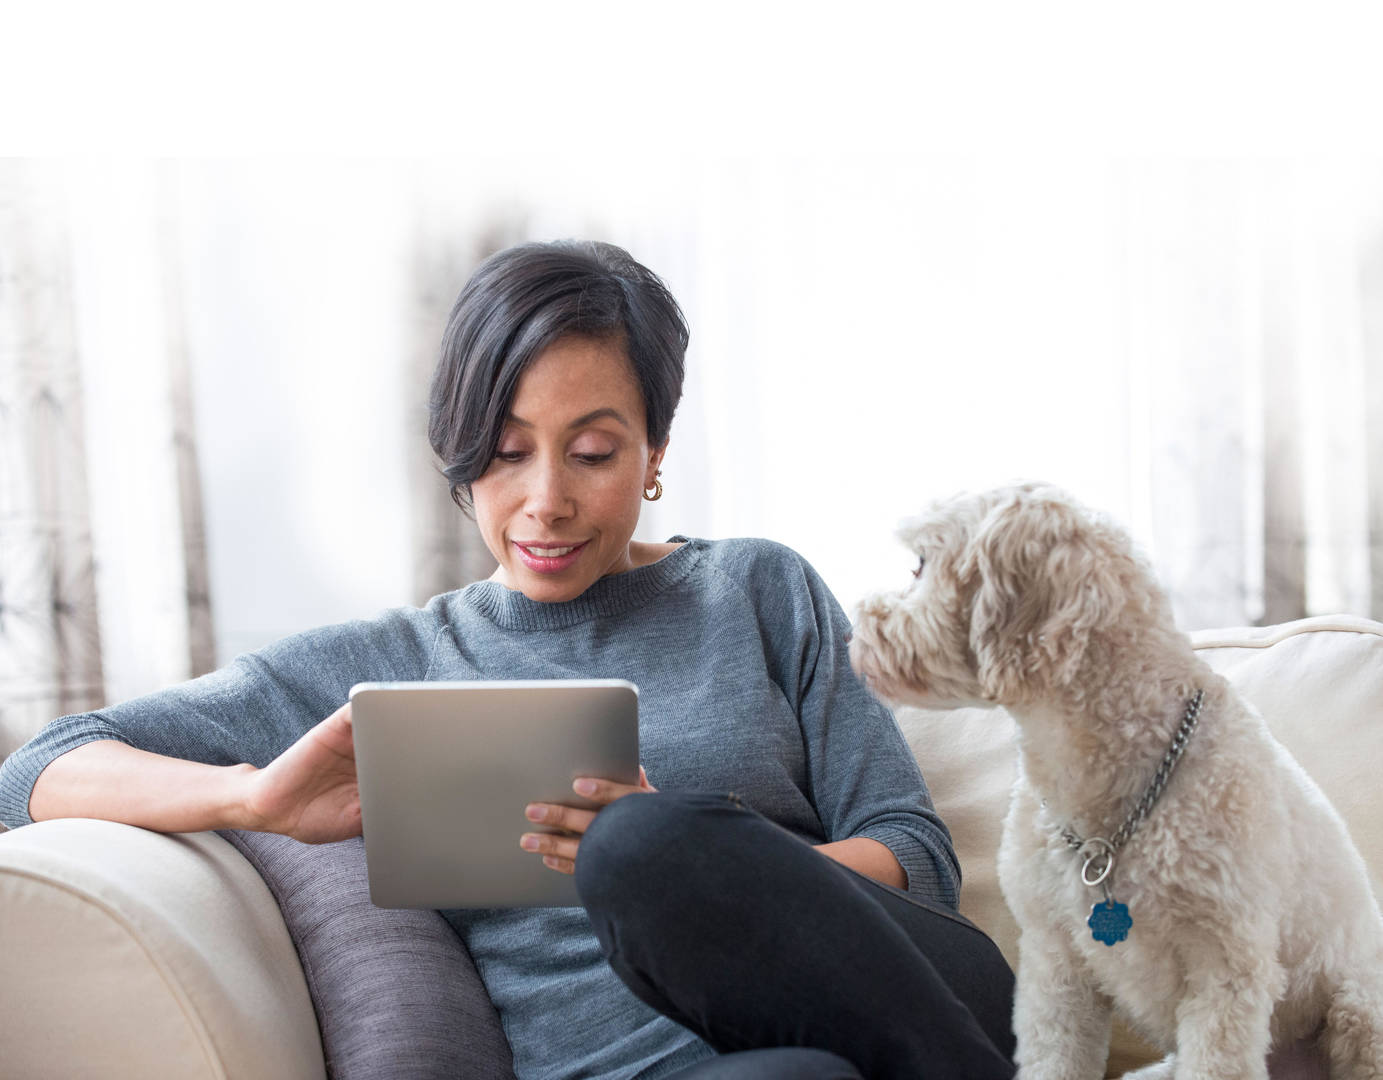 Black woman on couch with tablet and dog